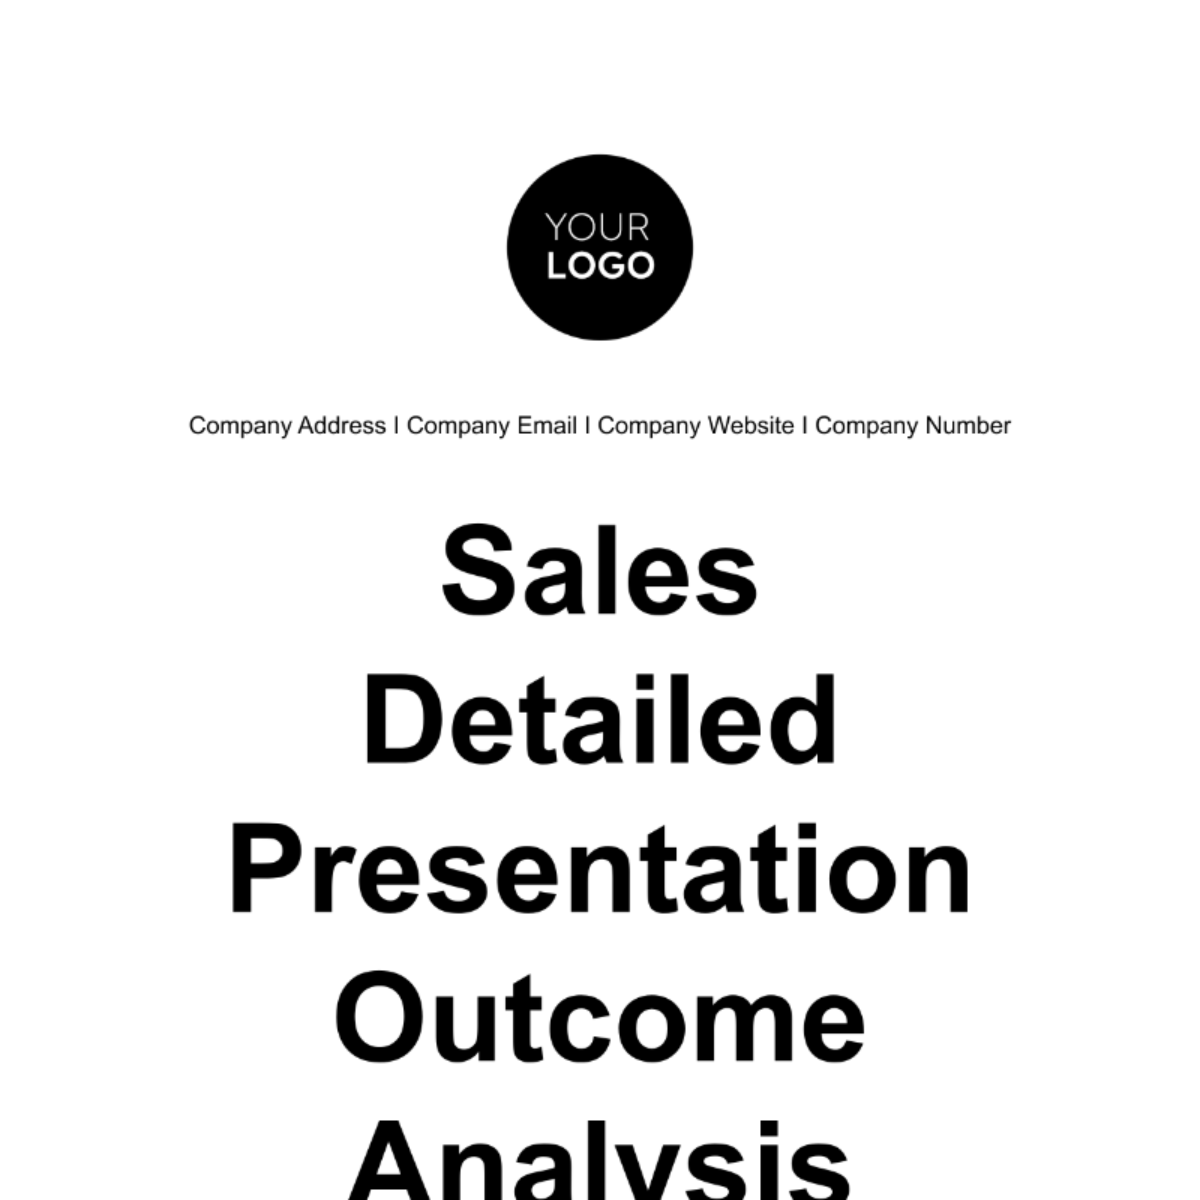 Sales Detailed Presentation Outcome Analysis Template